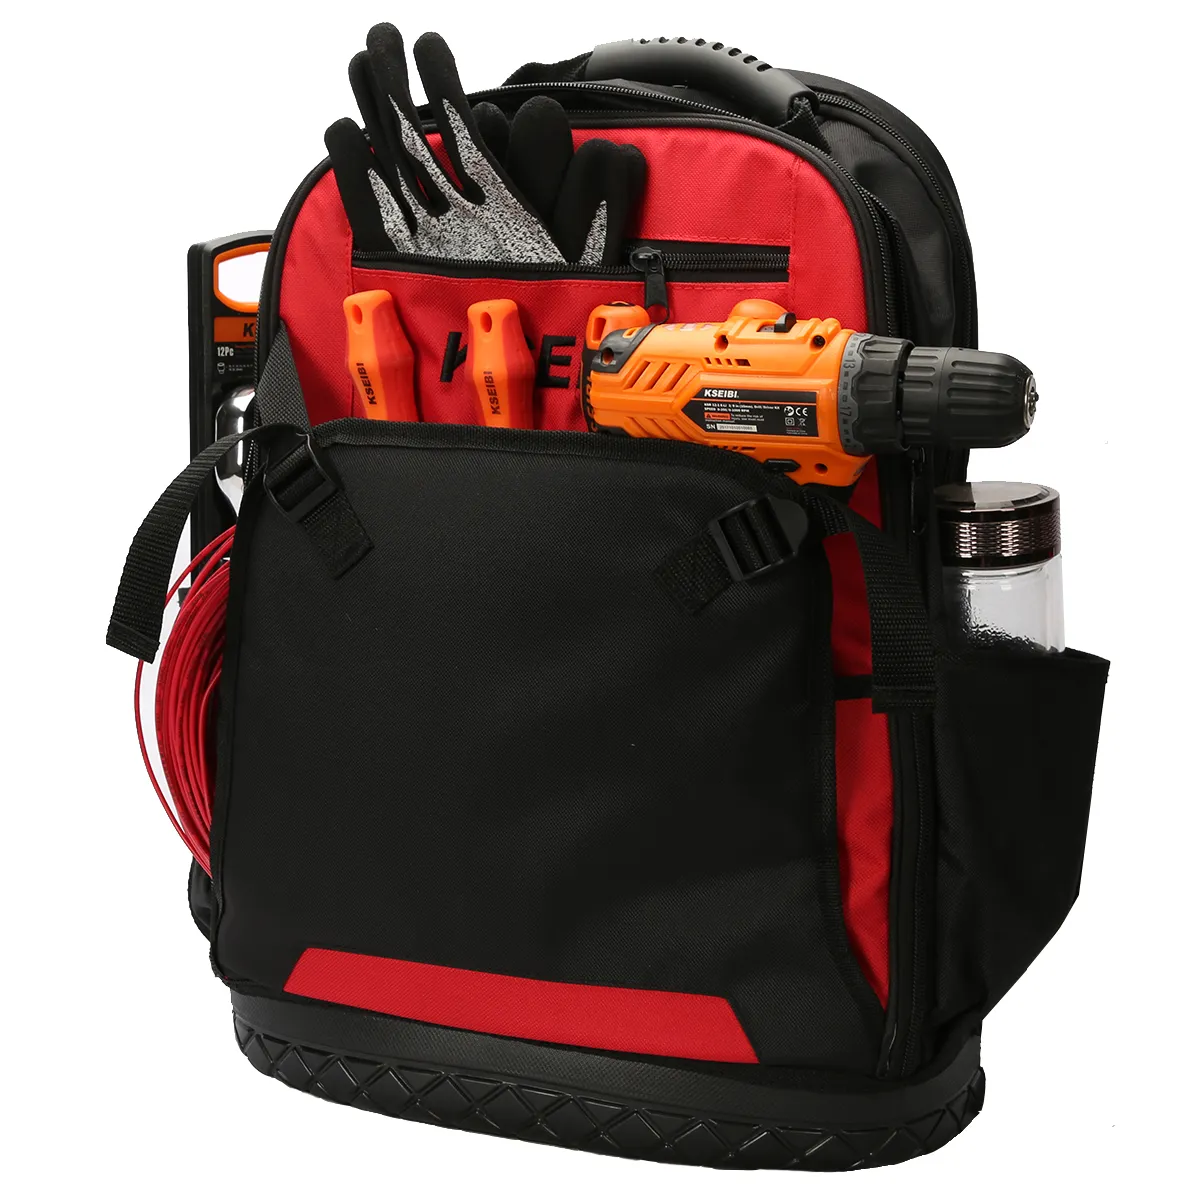 KSEIBI professional TOOL BACK PACK For Easily Carrying Tools